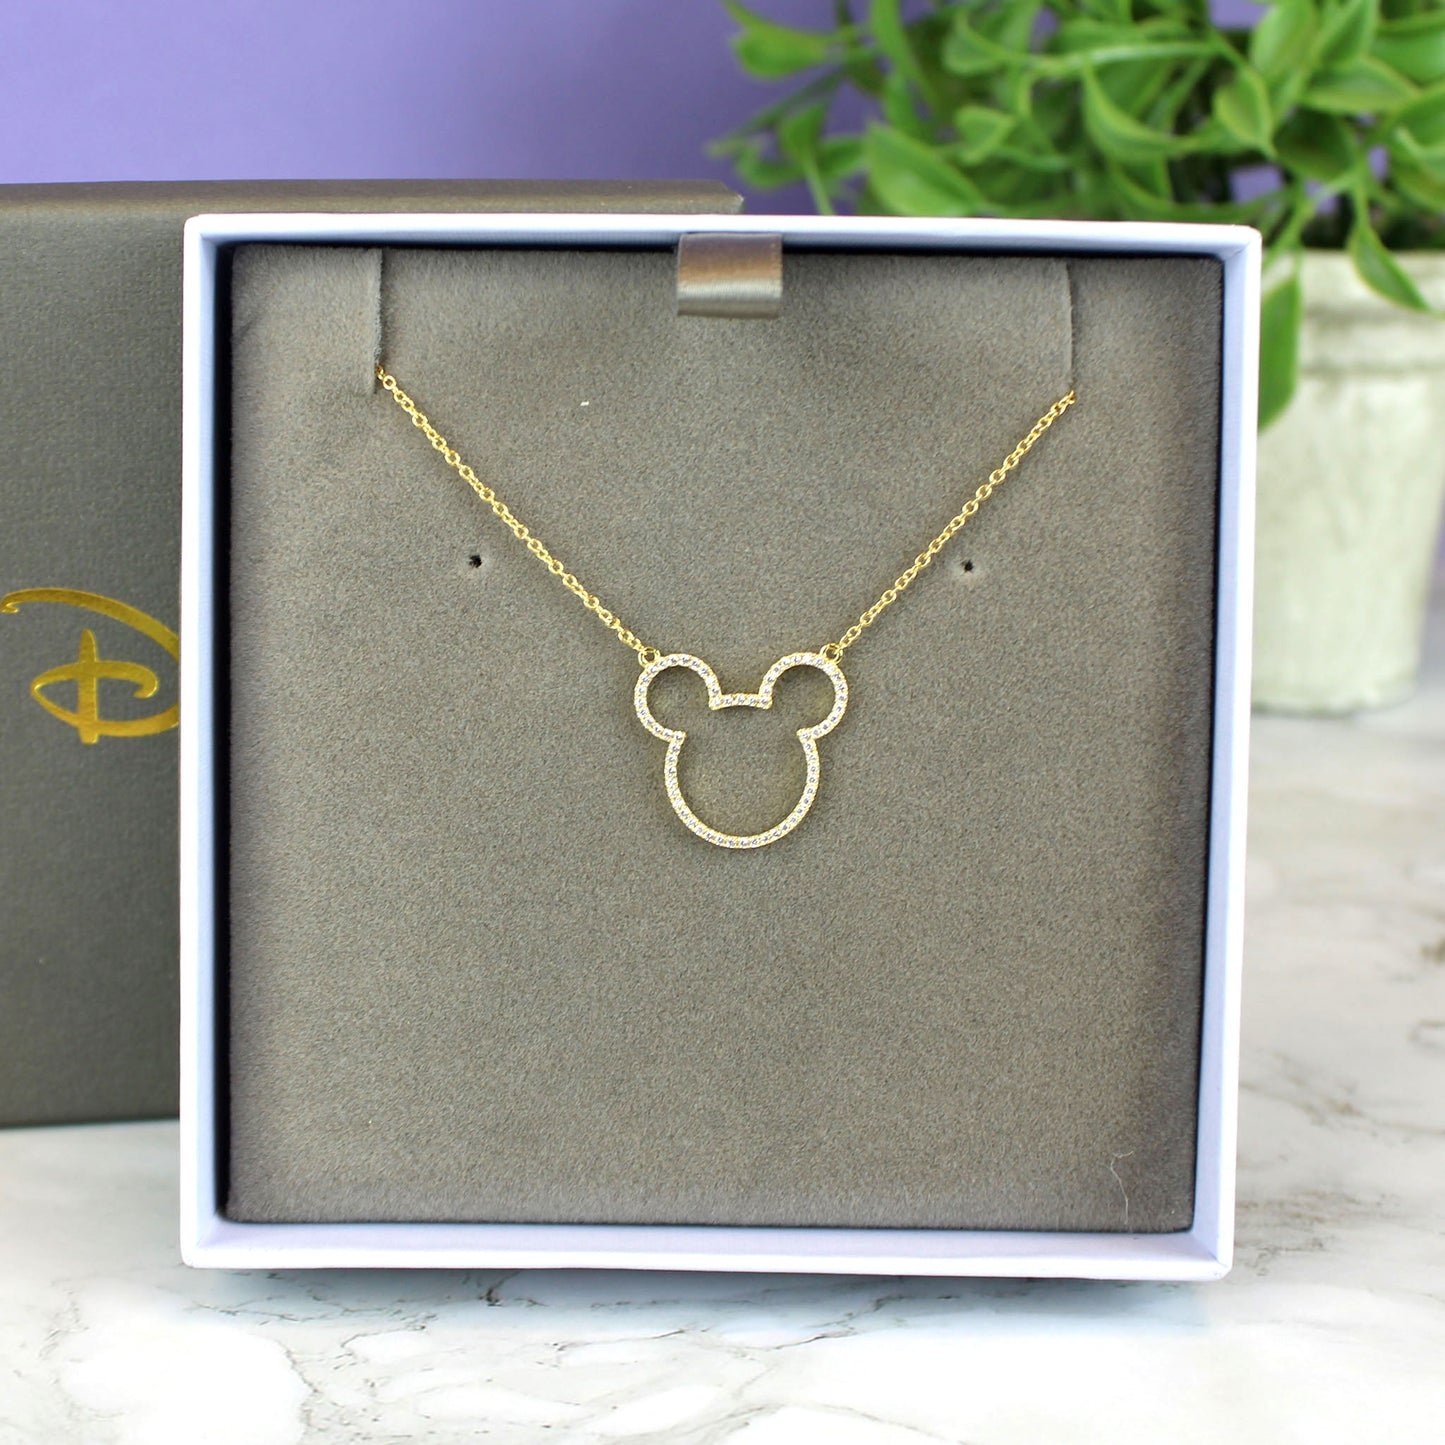 Elegant Mickey Mouse Necklace - Affordable Fashion